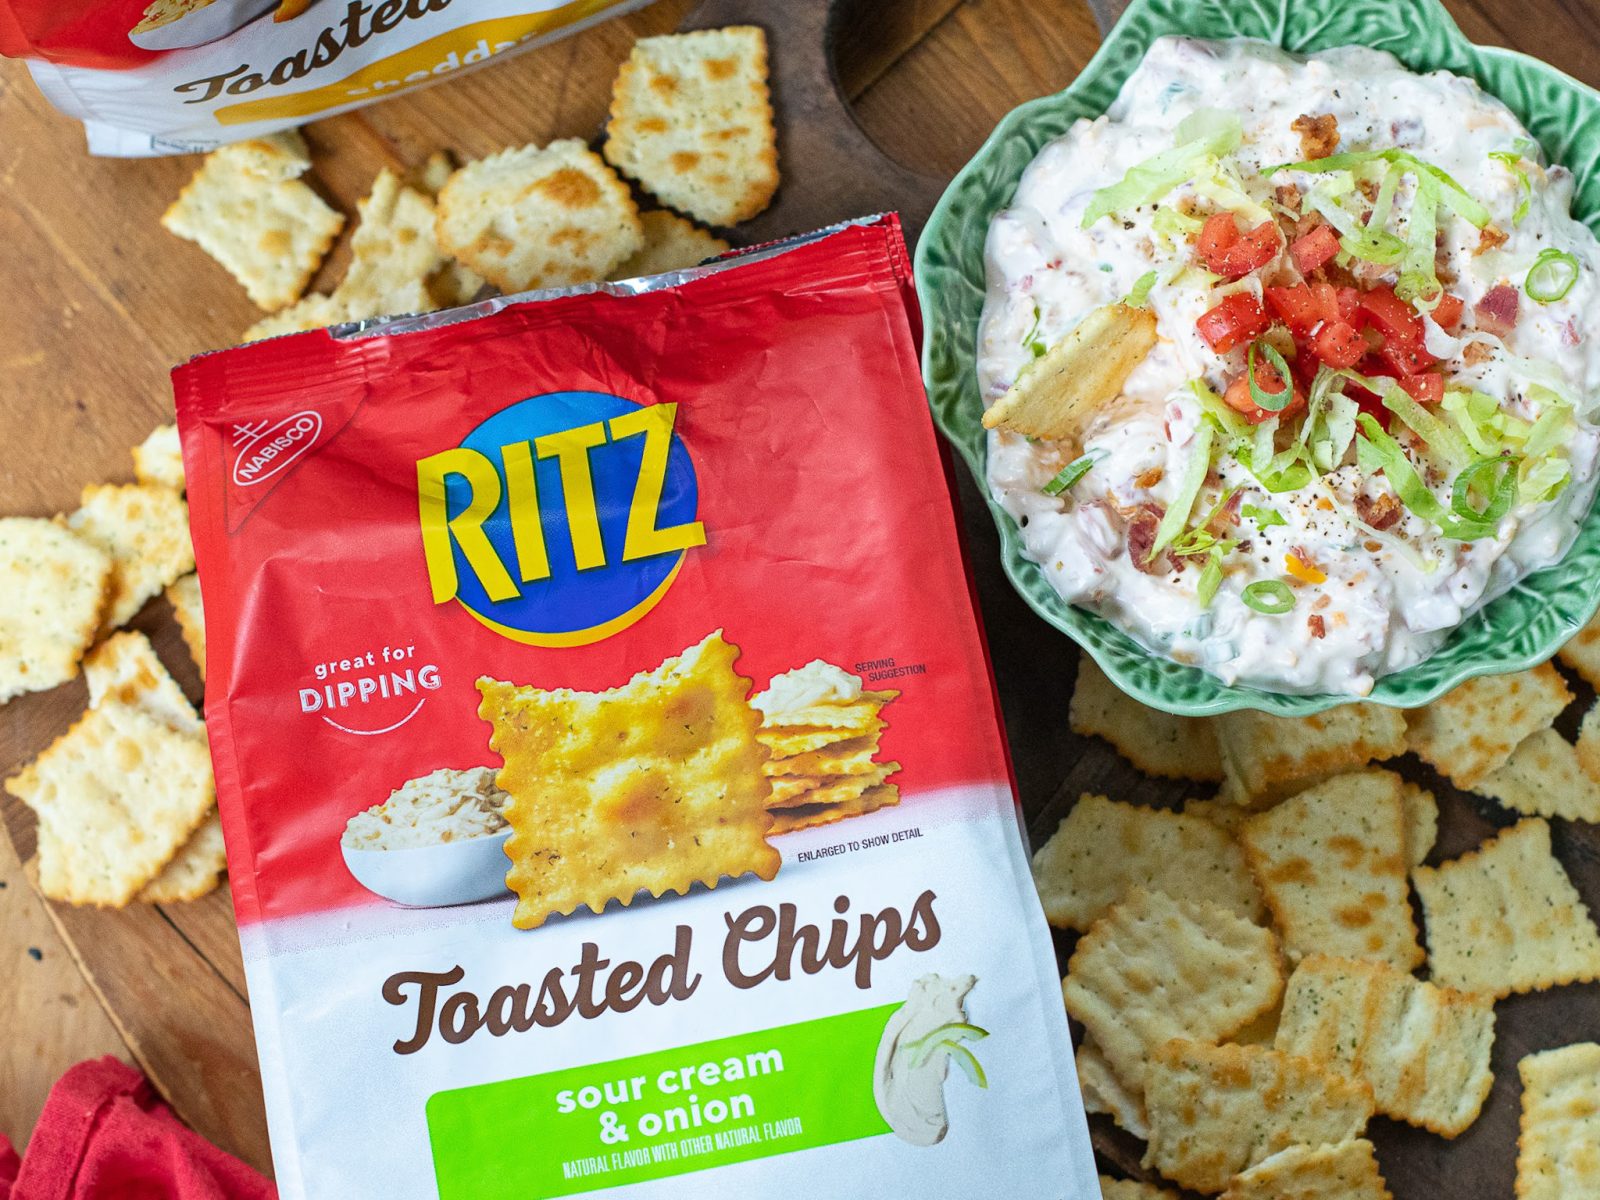 Ritz Toasted Chips Or Cheese Crispers Just $2.13 At Kroger (Regular Price $4.29)